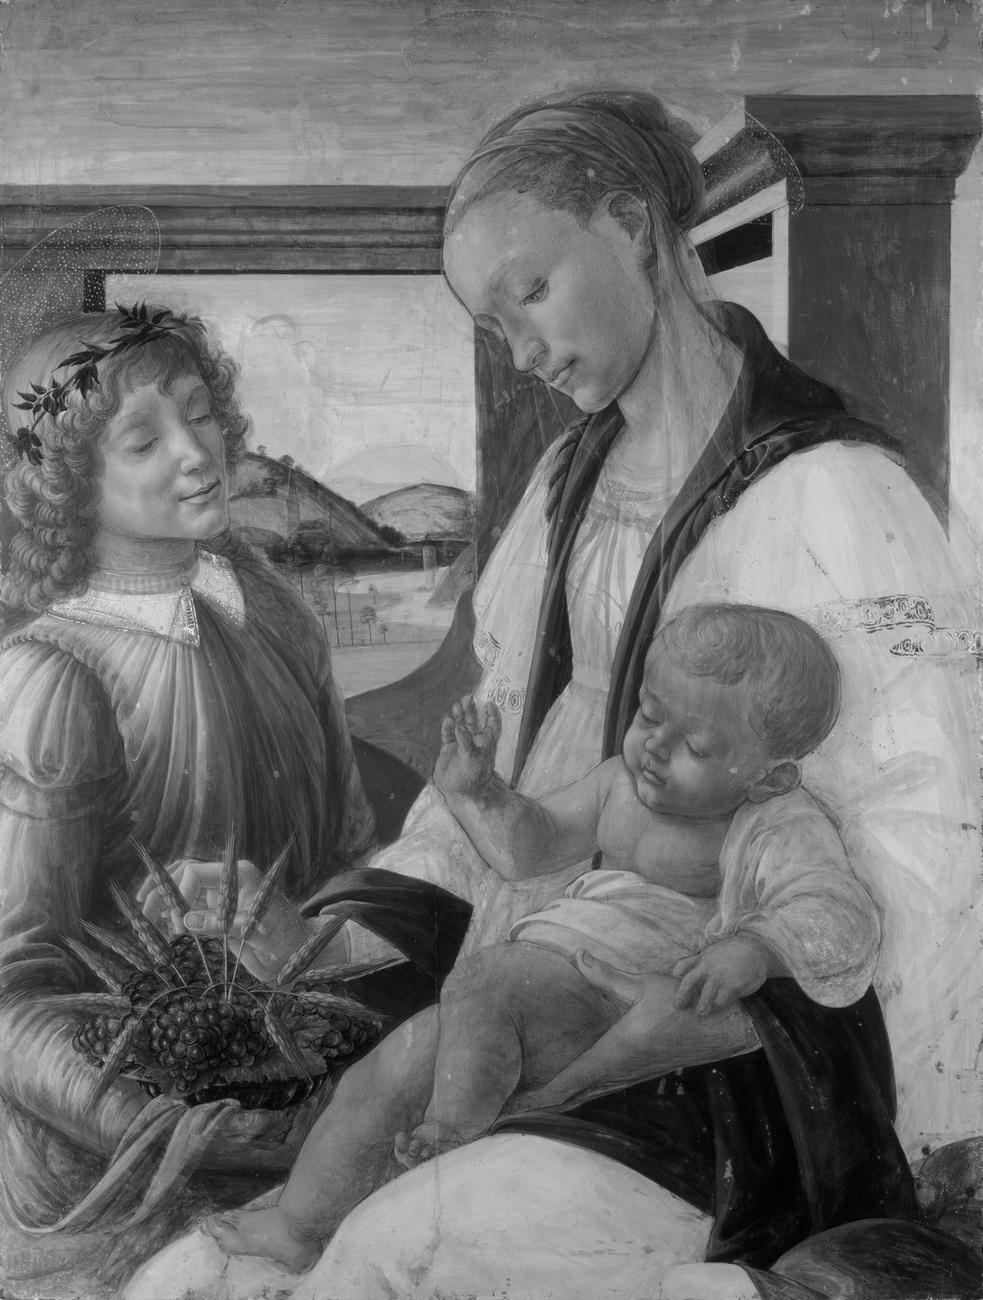 Black and white photograph of Botticelli’s painting Virgin and Child with an Angel taken using infrared light with visible drawing lines compared to the visible light color photograph of the painting